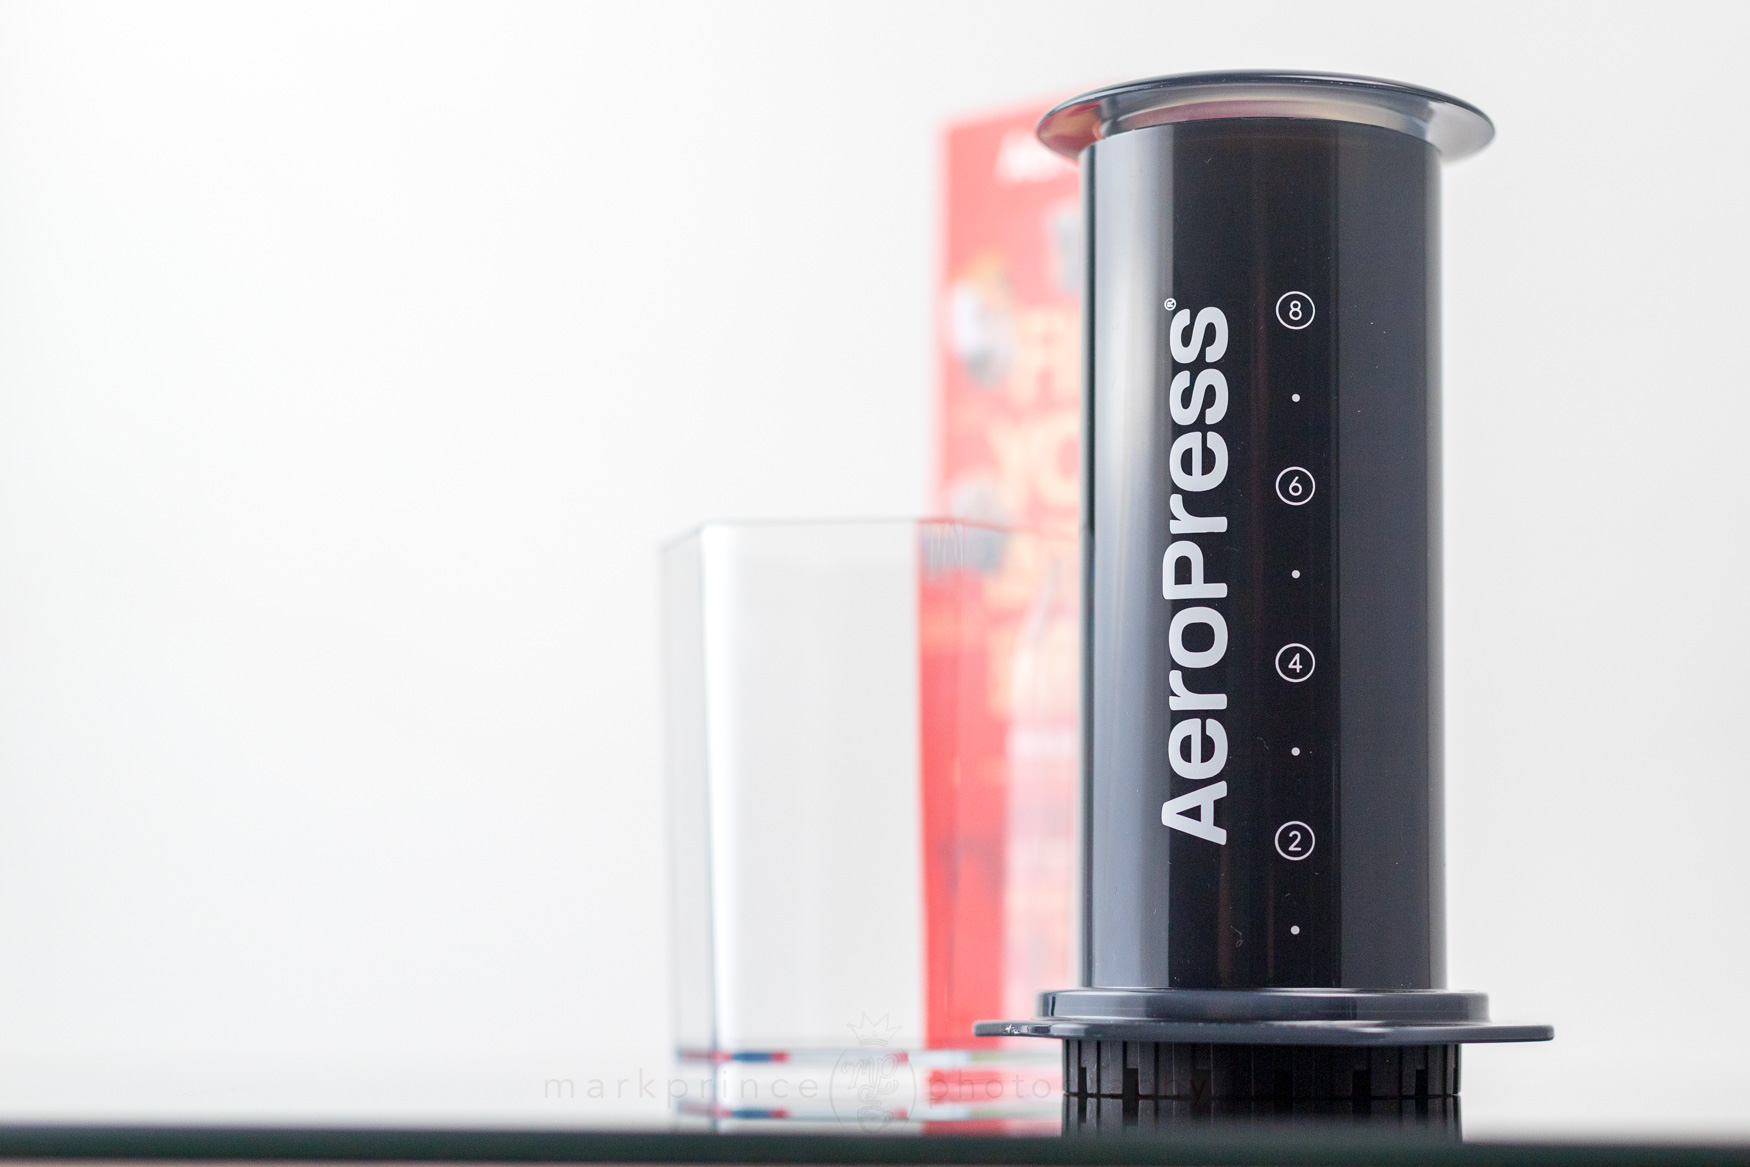 REVIEW: Introducing the AeroPress XL: Brew More Coffee with the Same Great  Flavor!